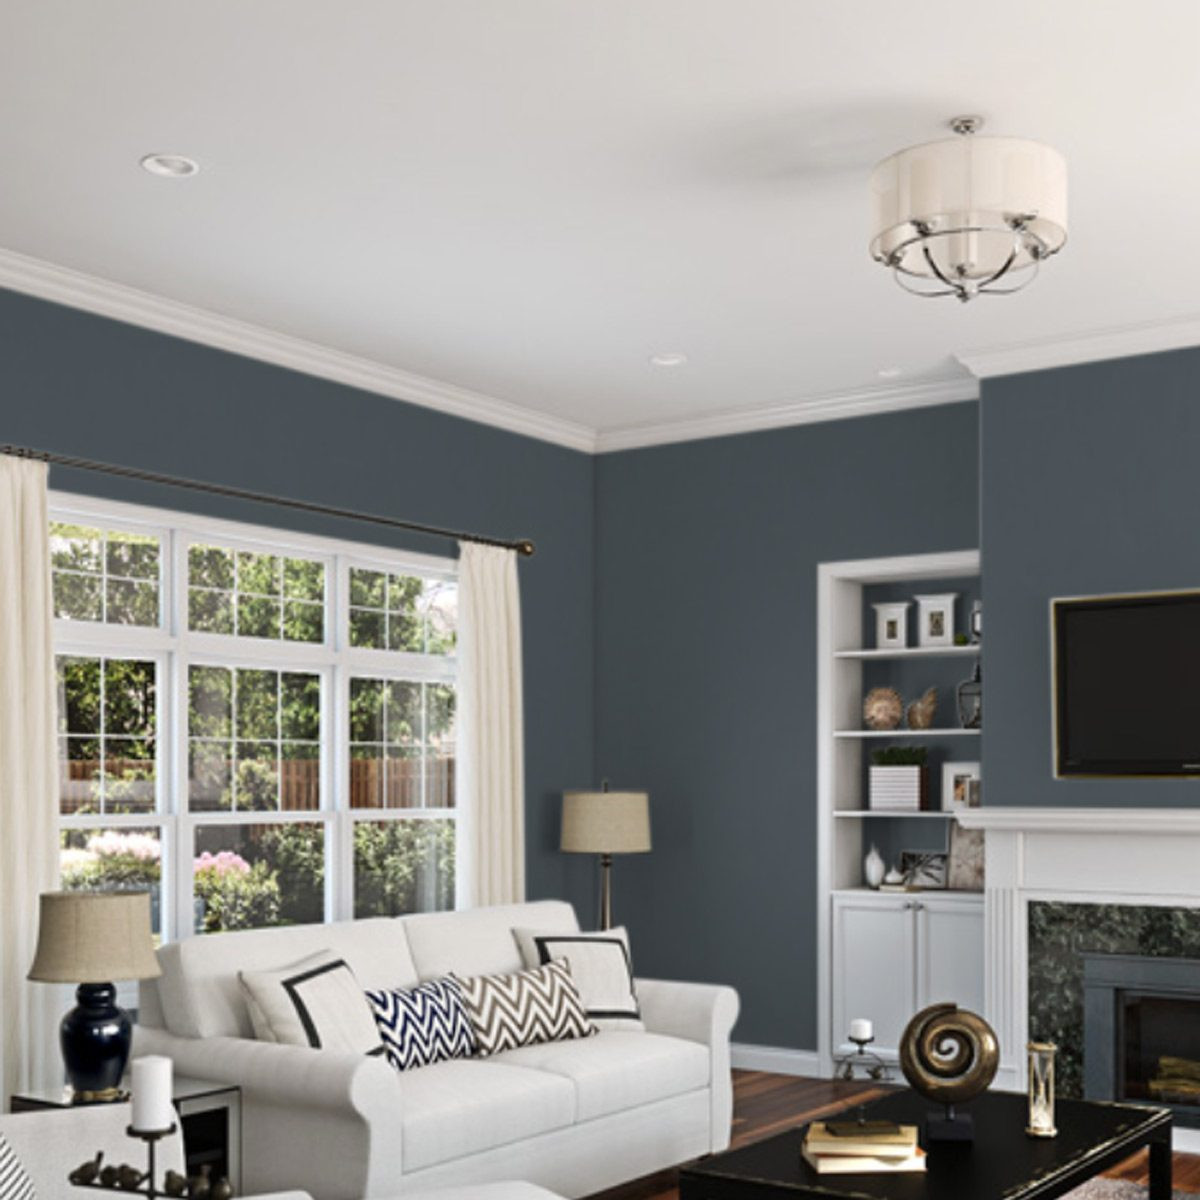 Living Room Wall Paint Colors
 The Best Wall Paint Colors to Transform Any Room